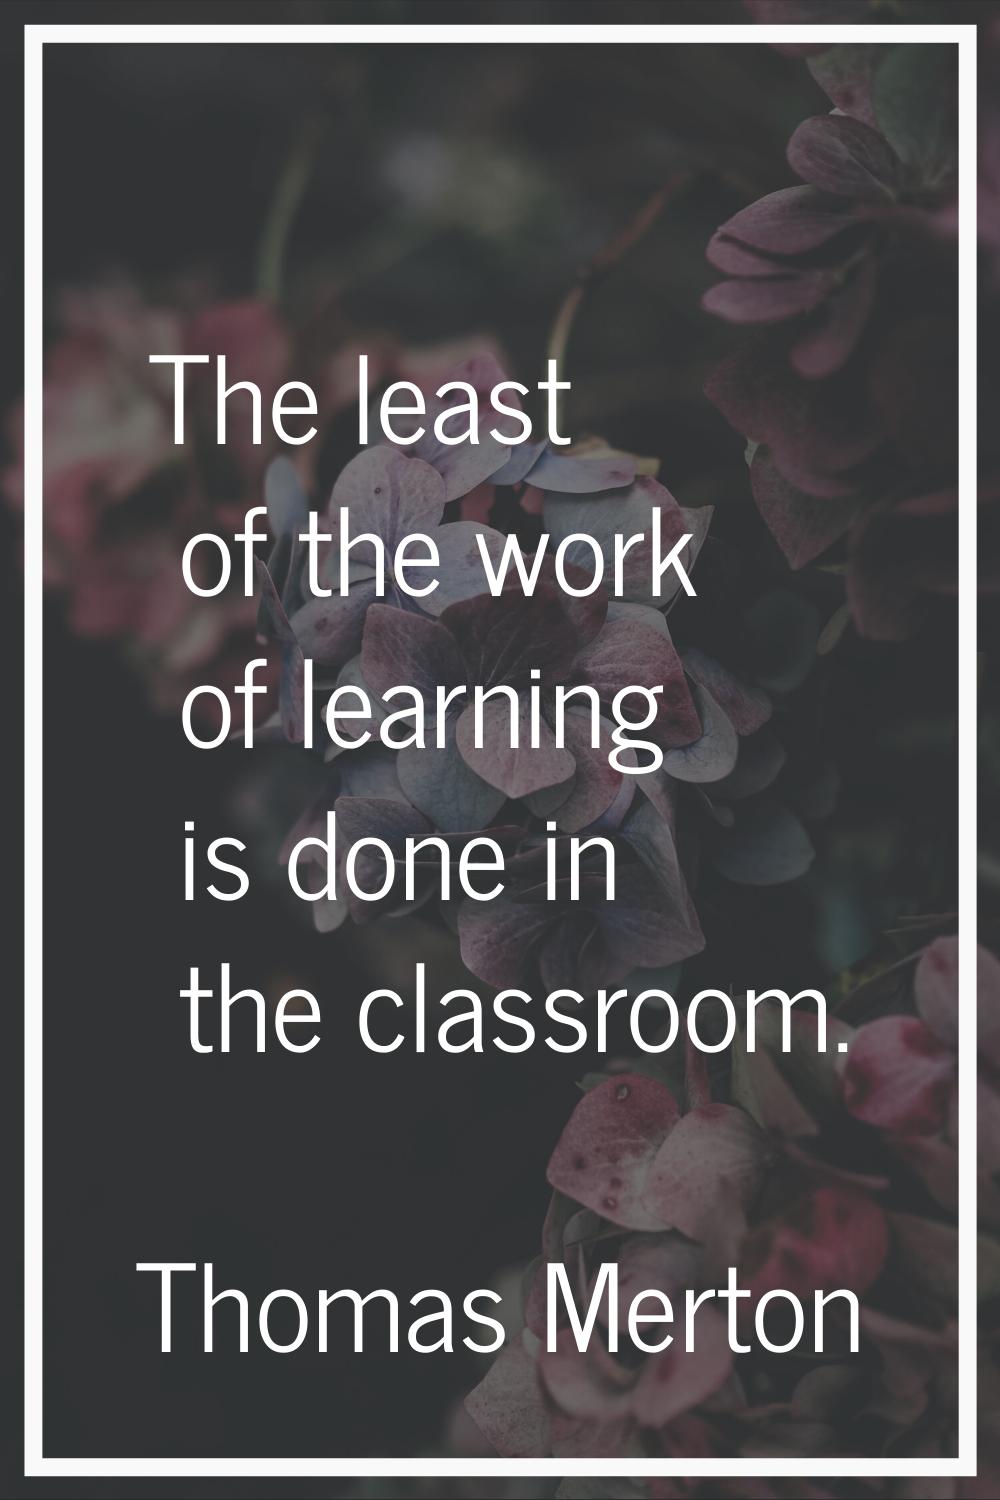 The least of the work of learning is done in the classroom.